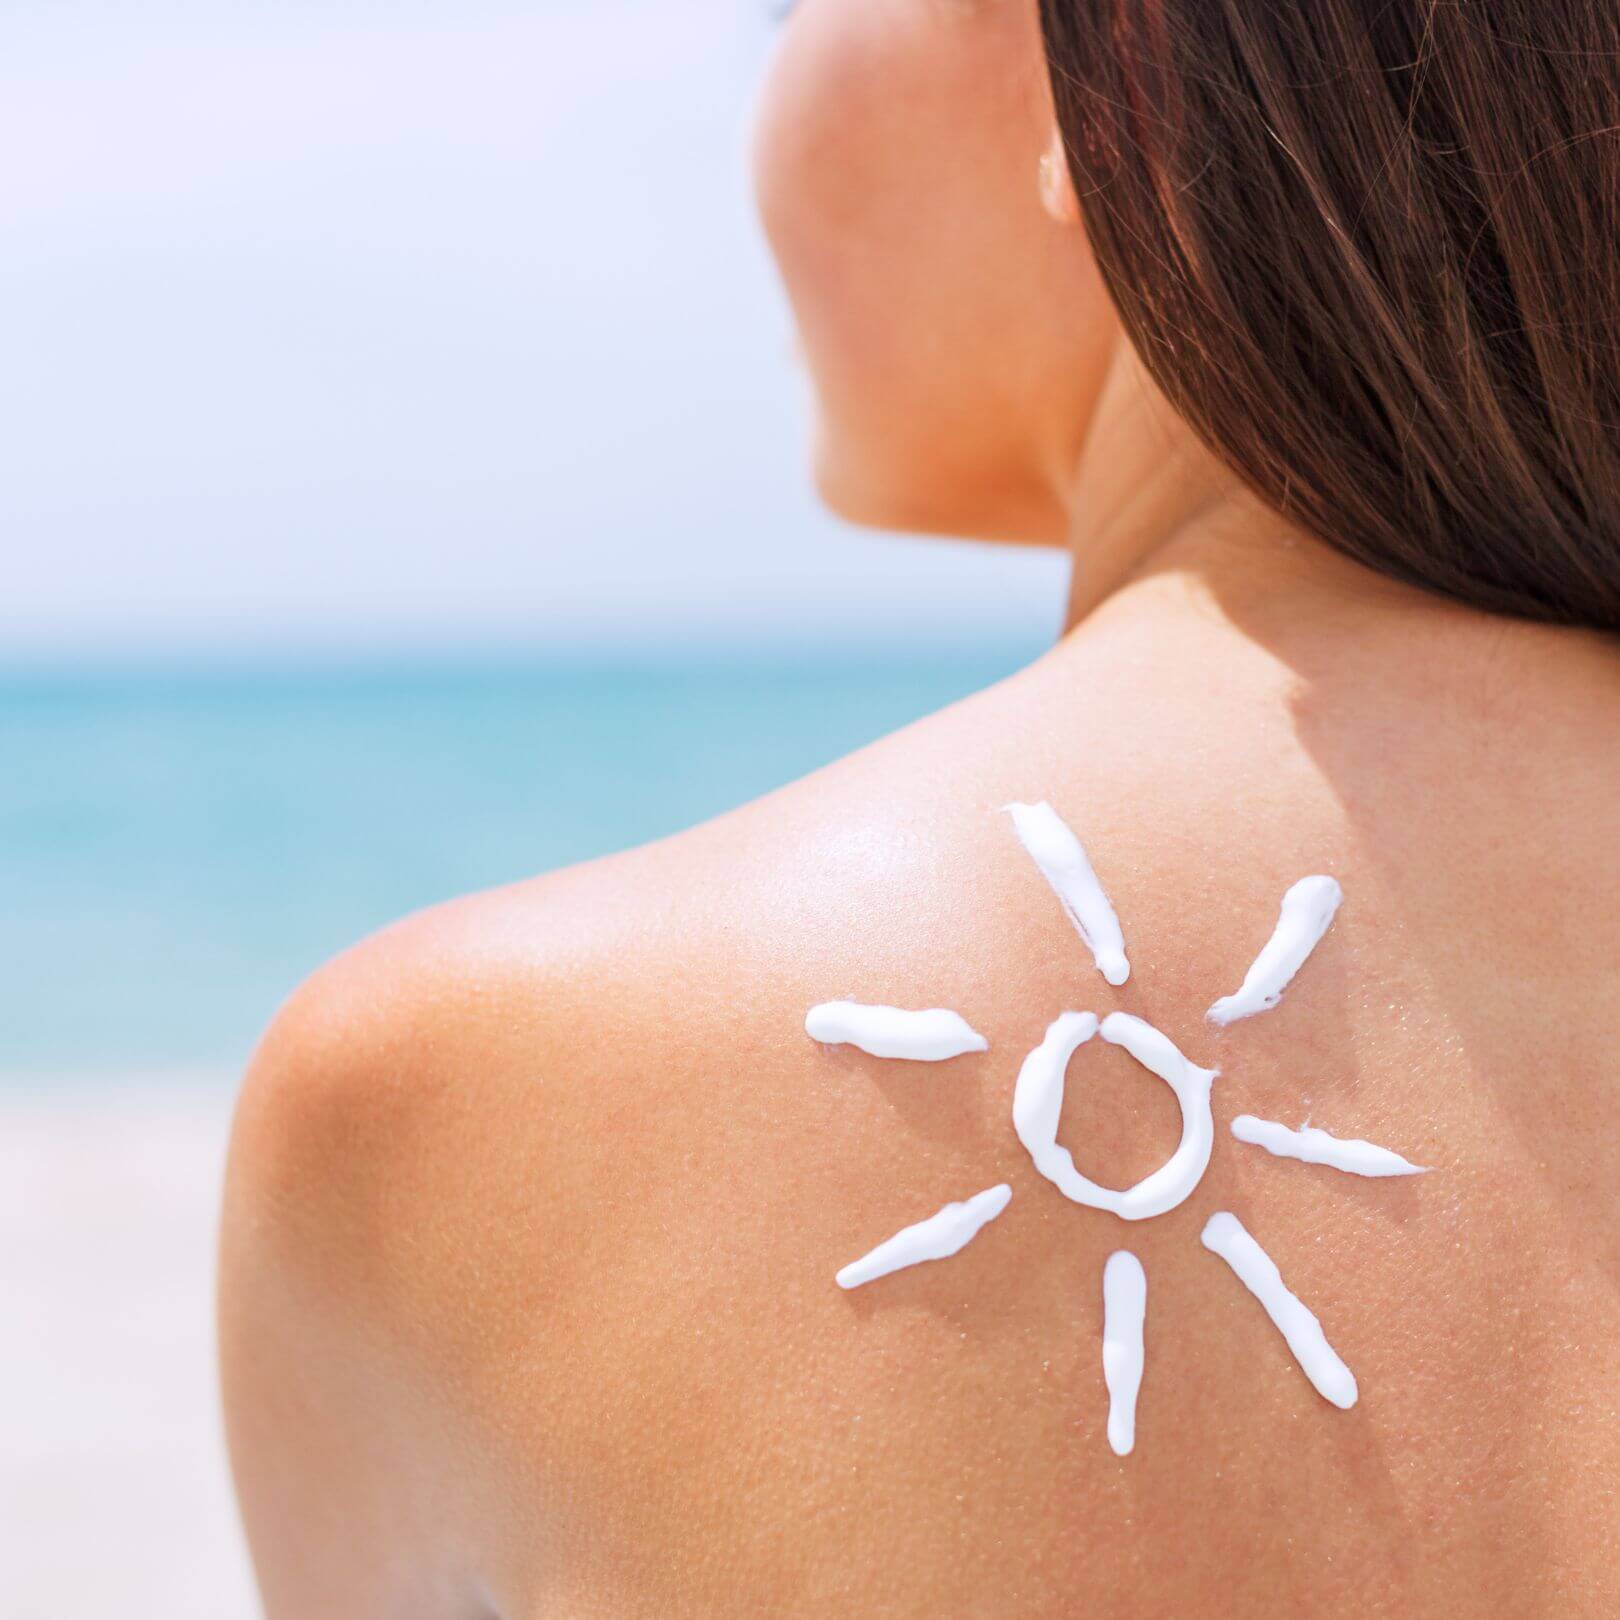 6 Sustainable and Natural Sunscreens